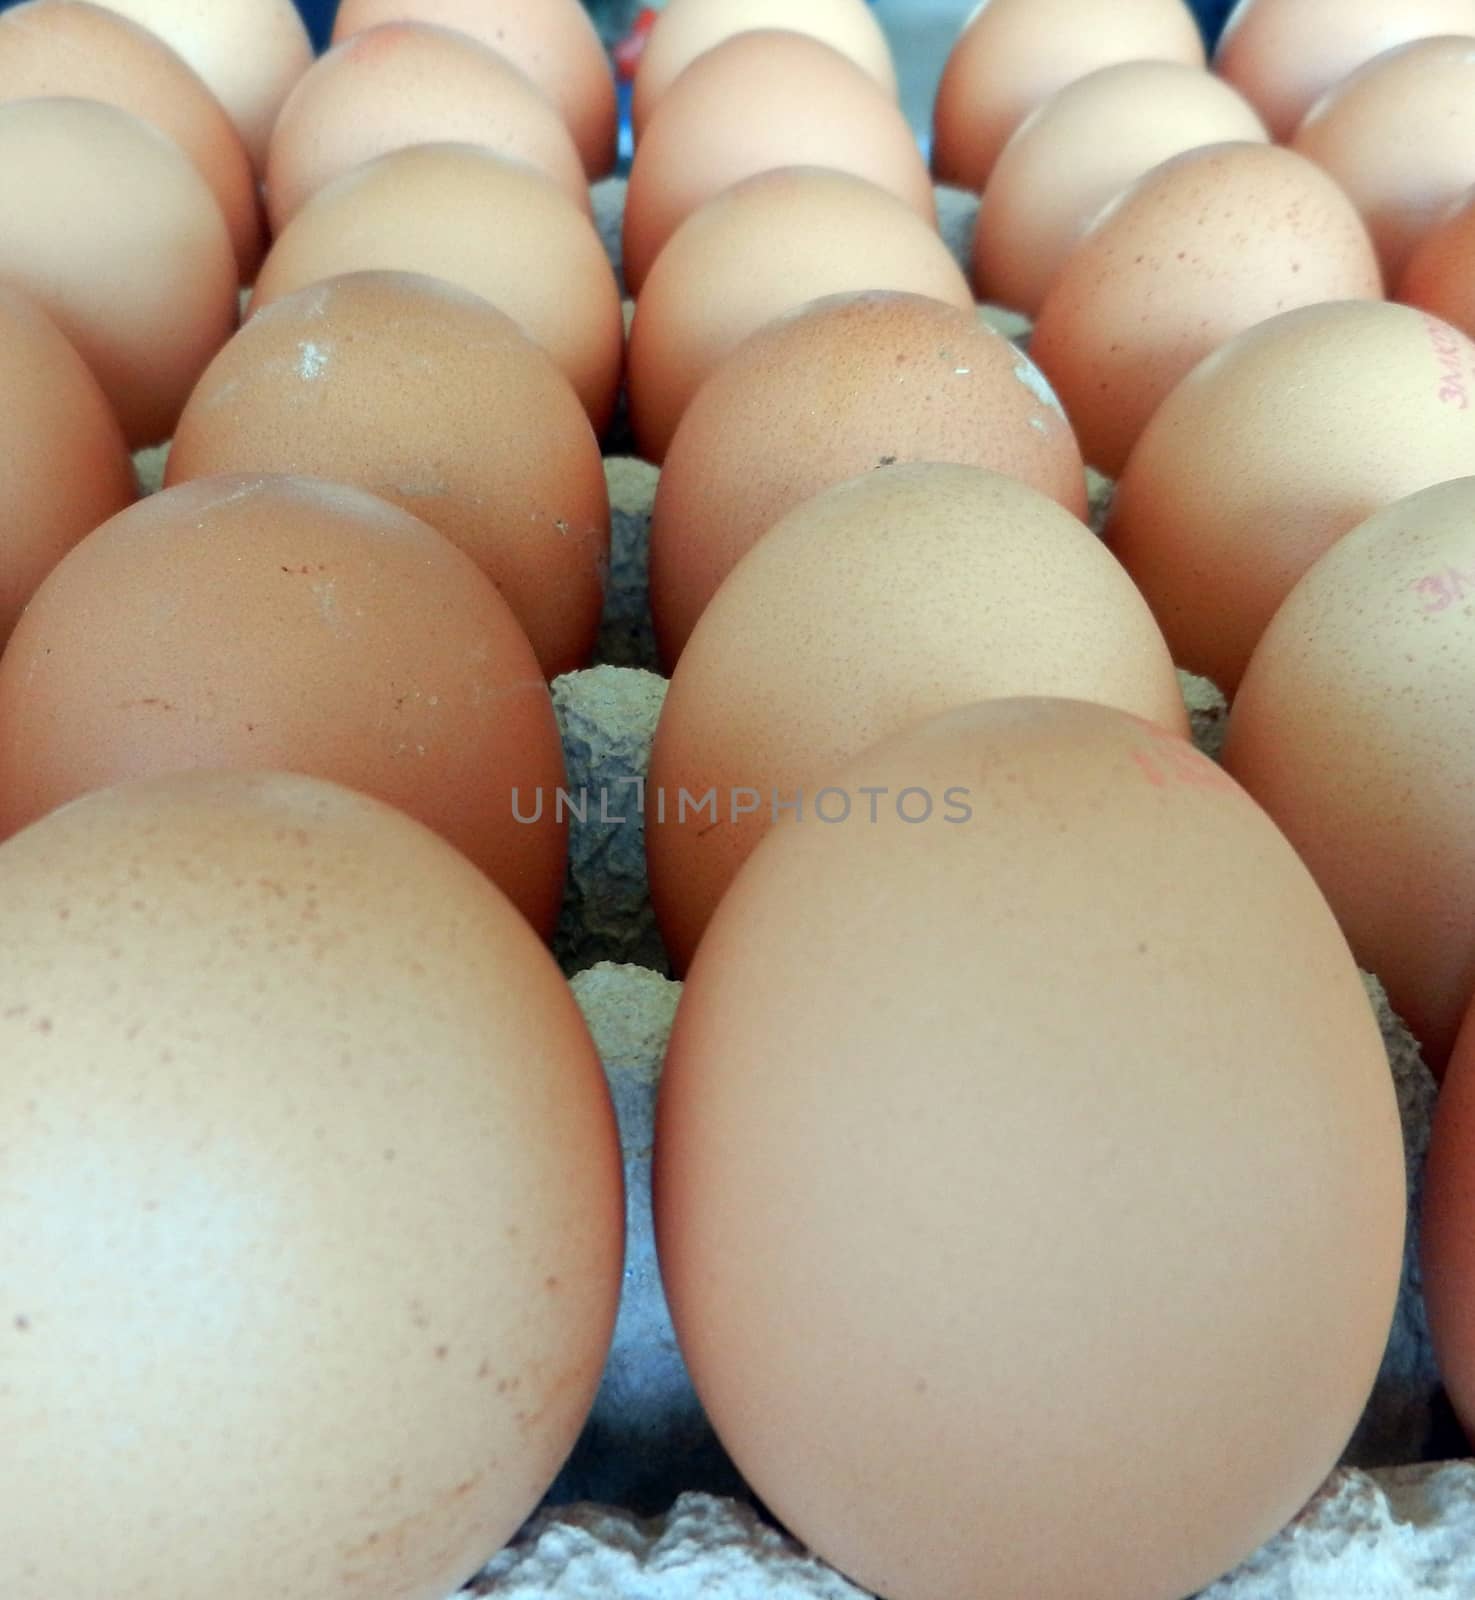               picture of  fresh eggs  in box for sale at a market                 